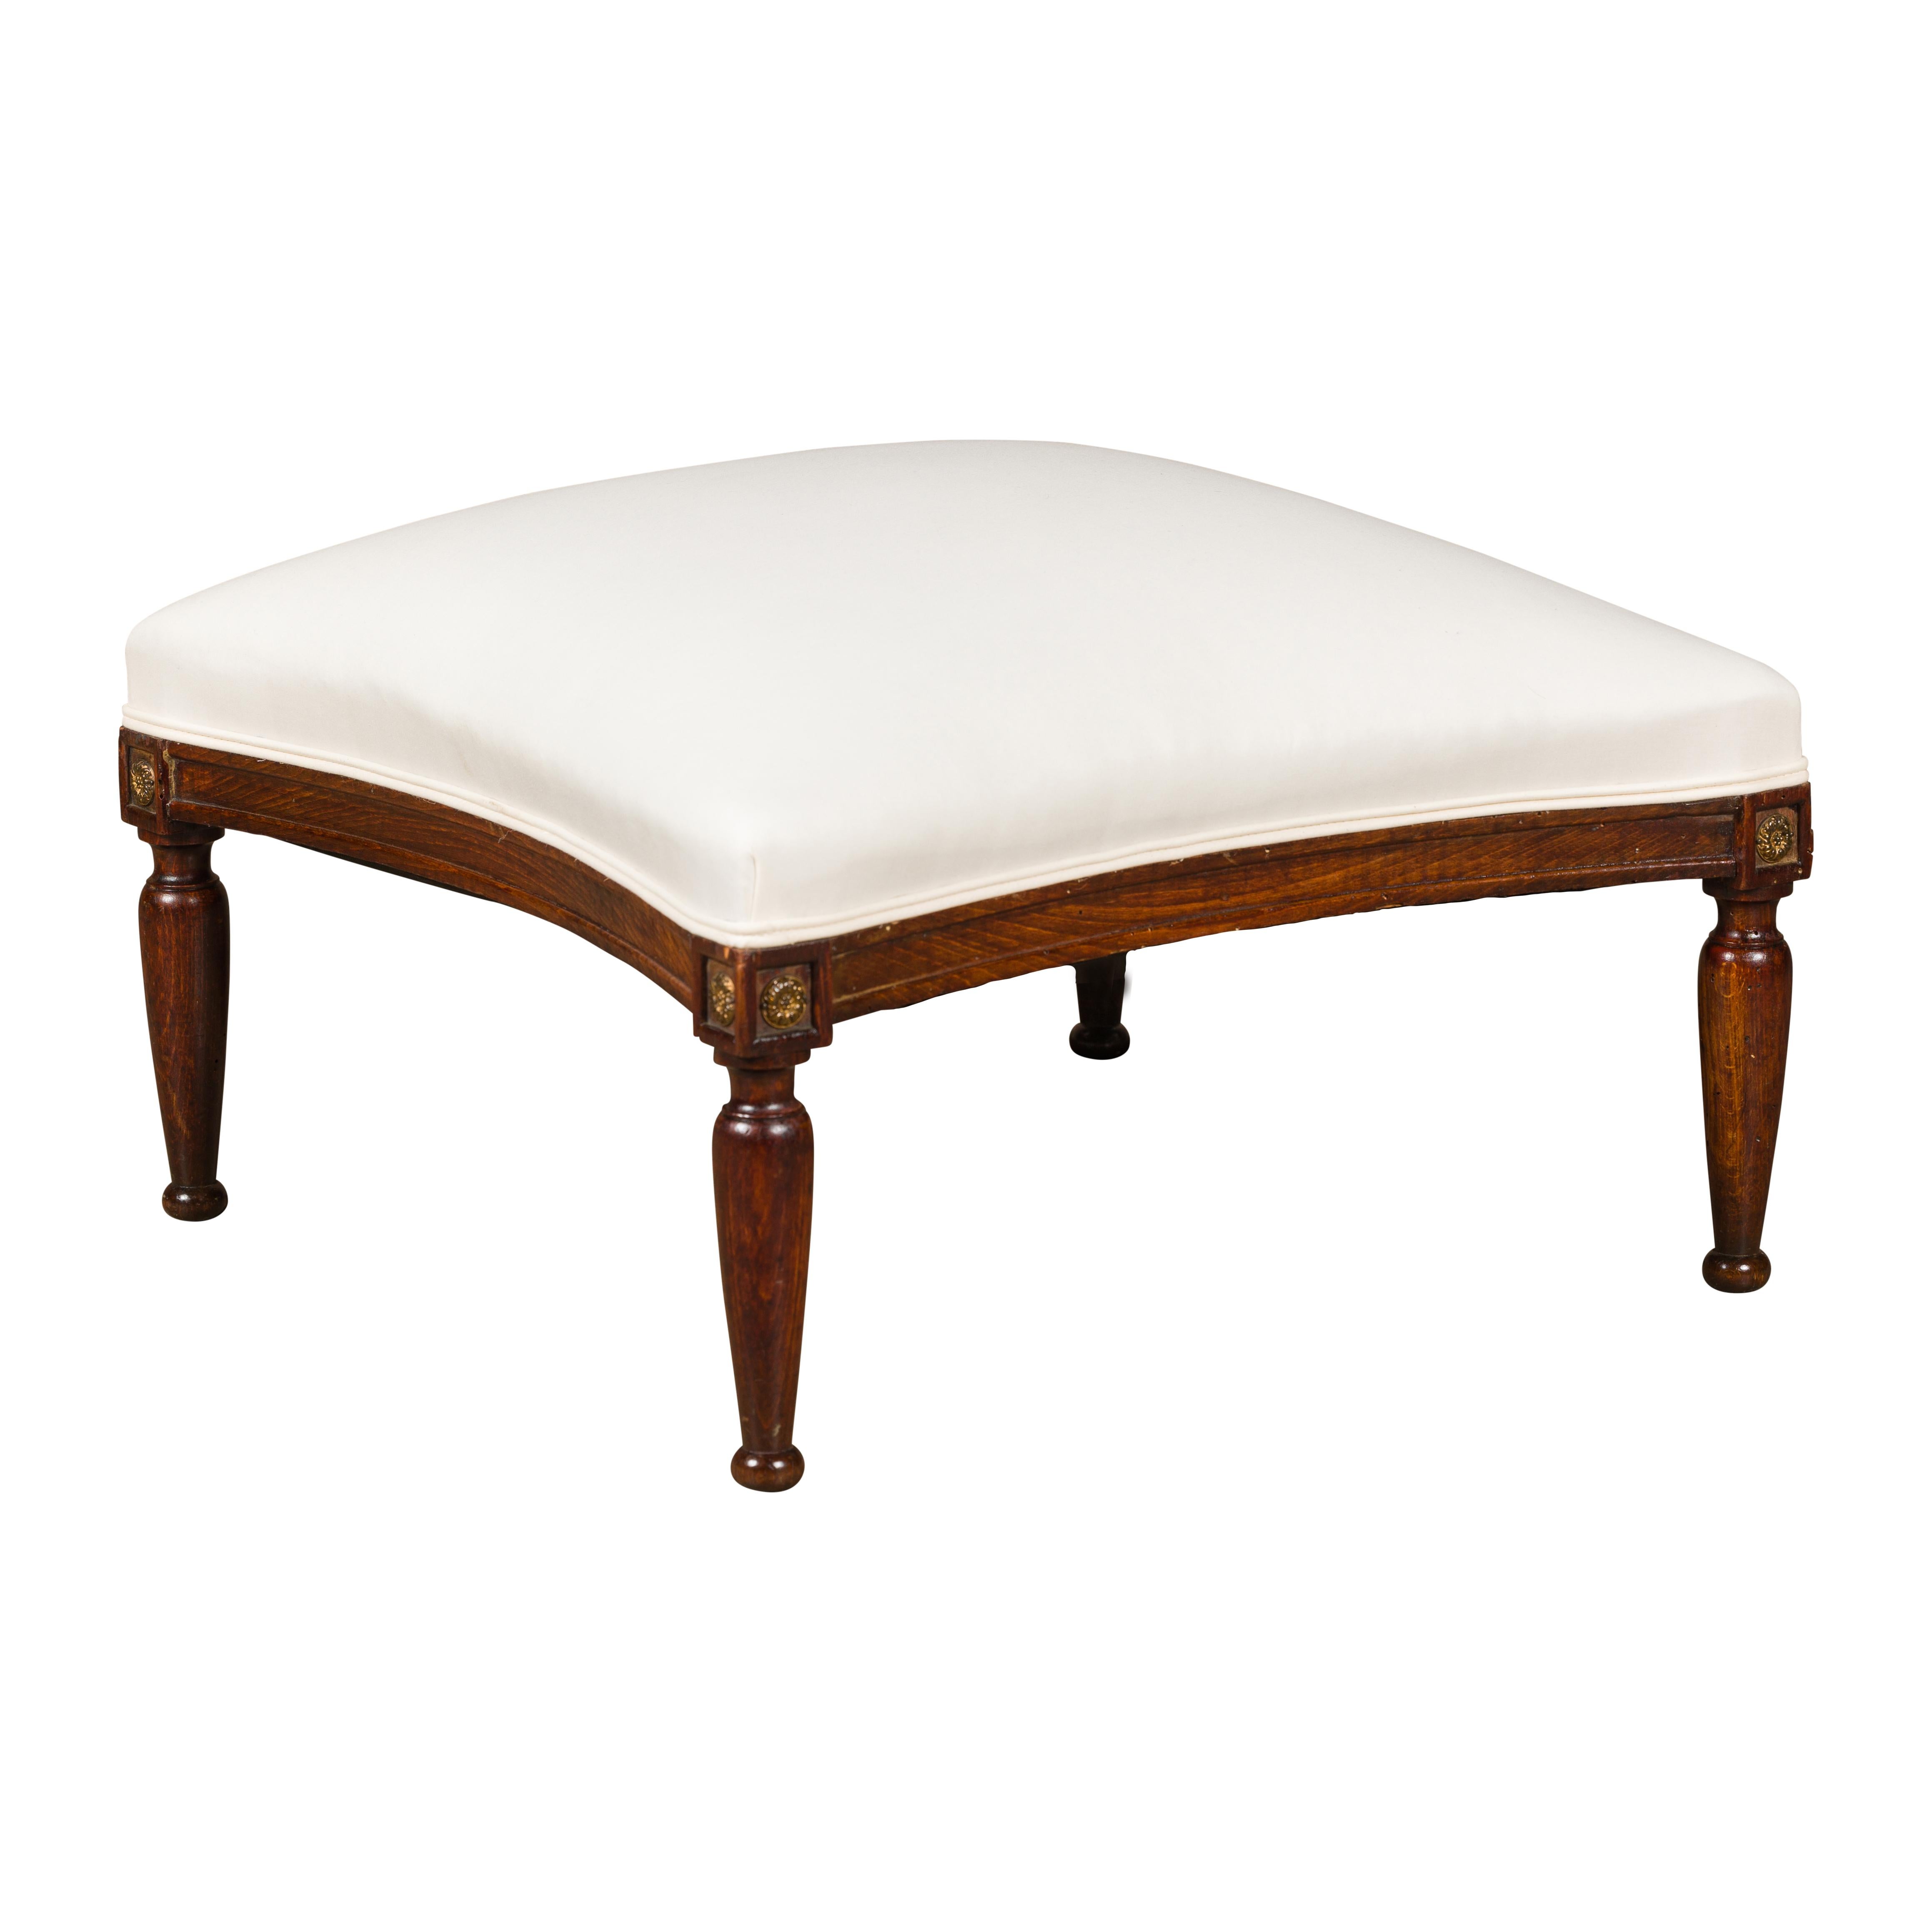 French Turn of the Century Ottoman with Giltwood Rosettes and Upholstery, 1900s For Sale 9